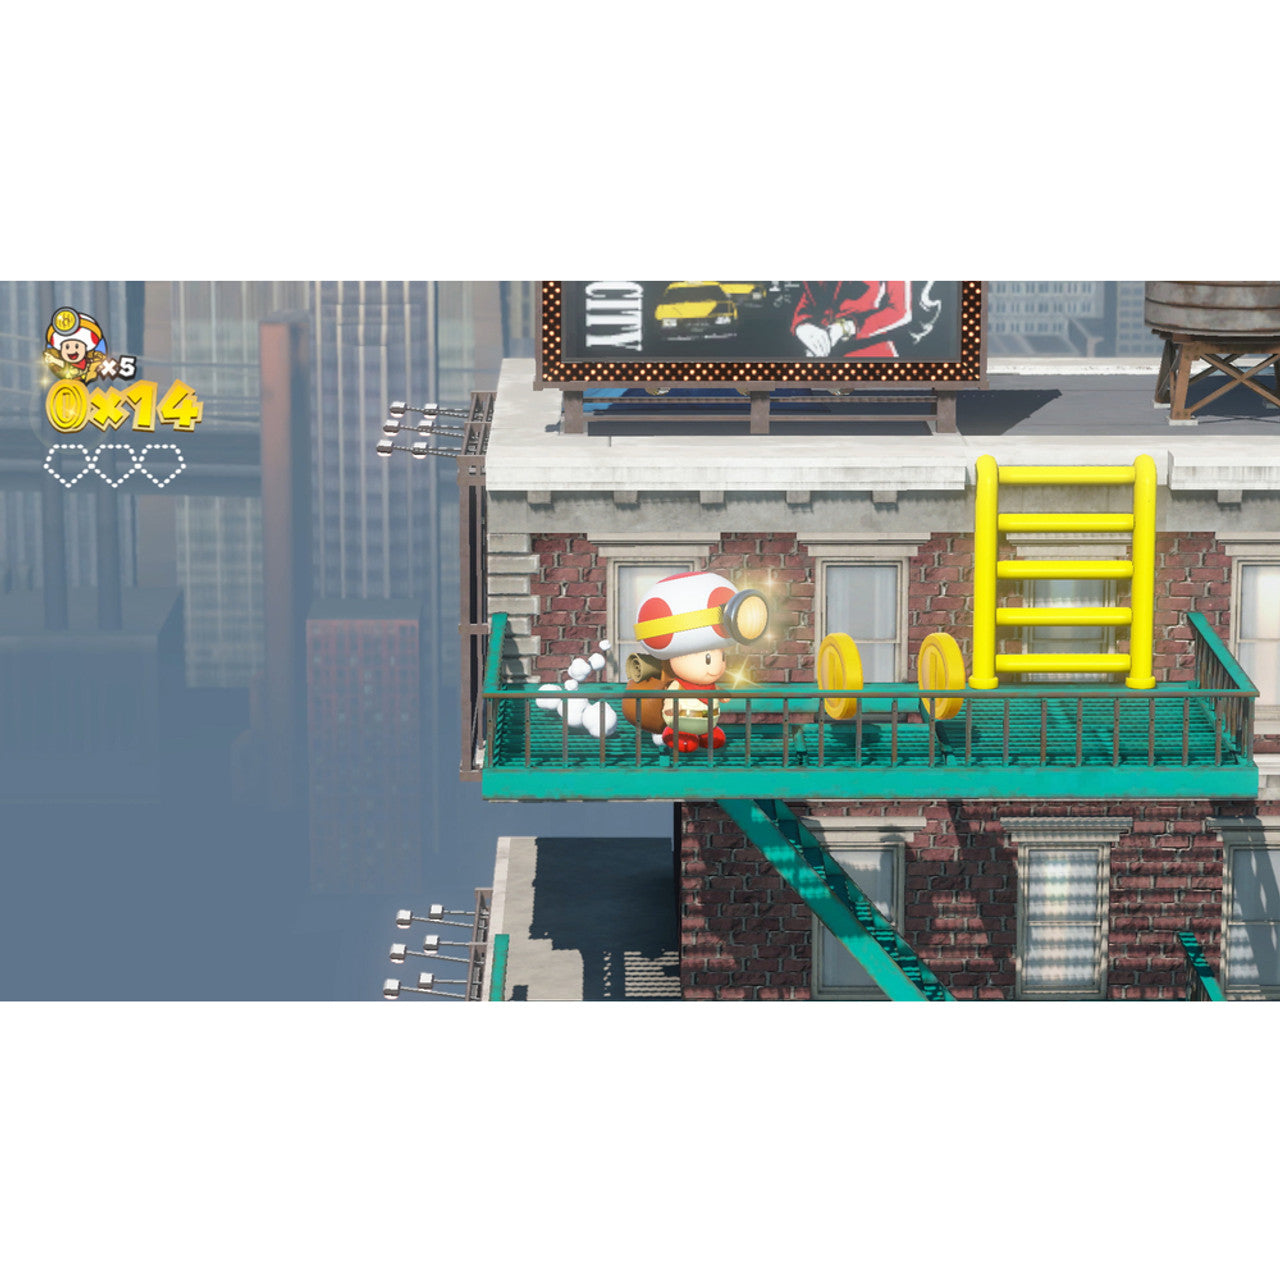 Product Image : This is brand new.<br>Ready for adventure? Captain Toad stars in his own puzzling quest through maze-like mini-universes! Each stage is stacked with tricks and traps, so our stubby hero will have to use his wits to dodge dangers and track those treasures. Survive smoldering volcanoes, hazardous steam engines, haunted houses, and more—all in the name of treasure!

That’s Captain Toad’s mission in life—to hunt juicy valuables like Super Gems and Power Stars across puzzling microcosms of danger